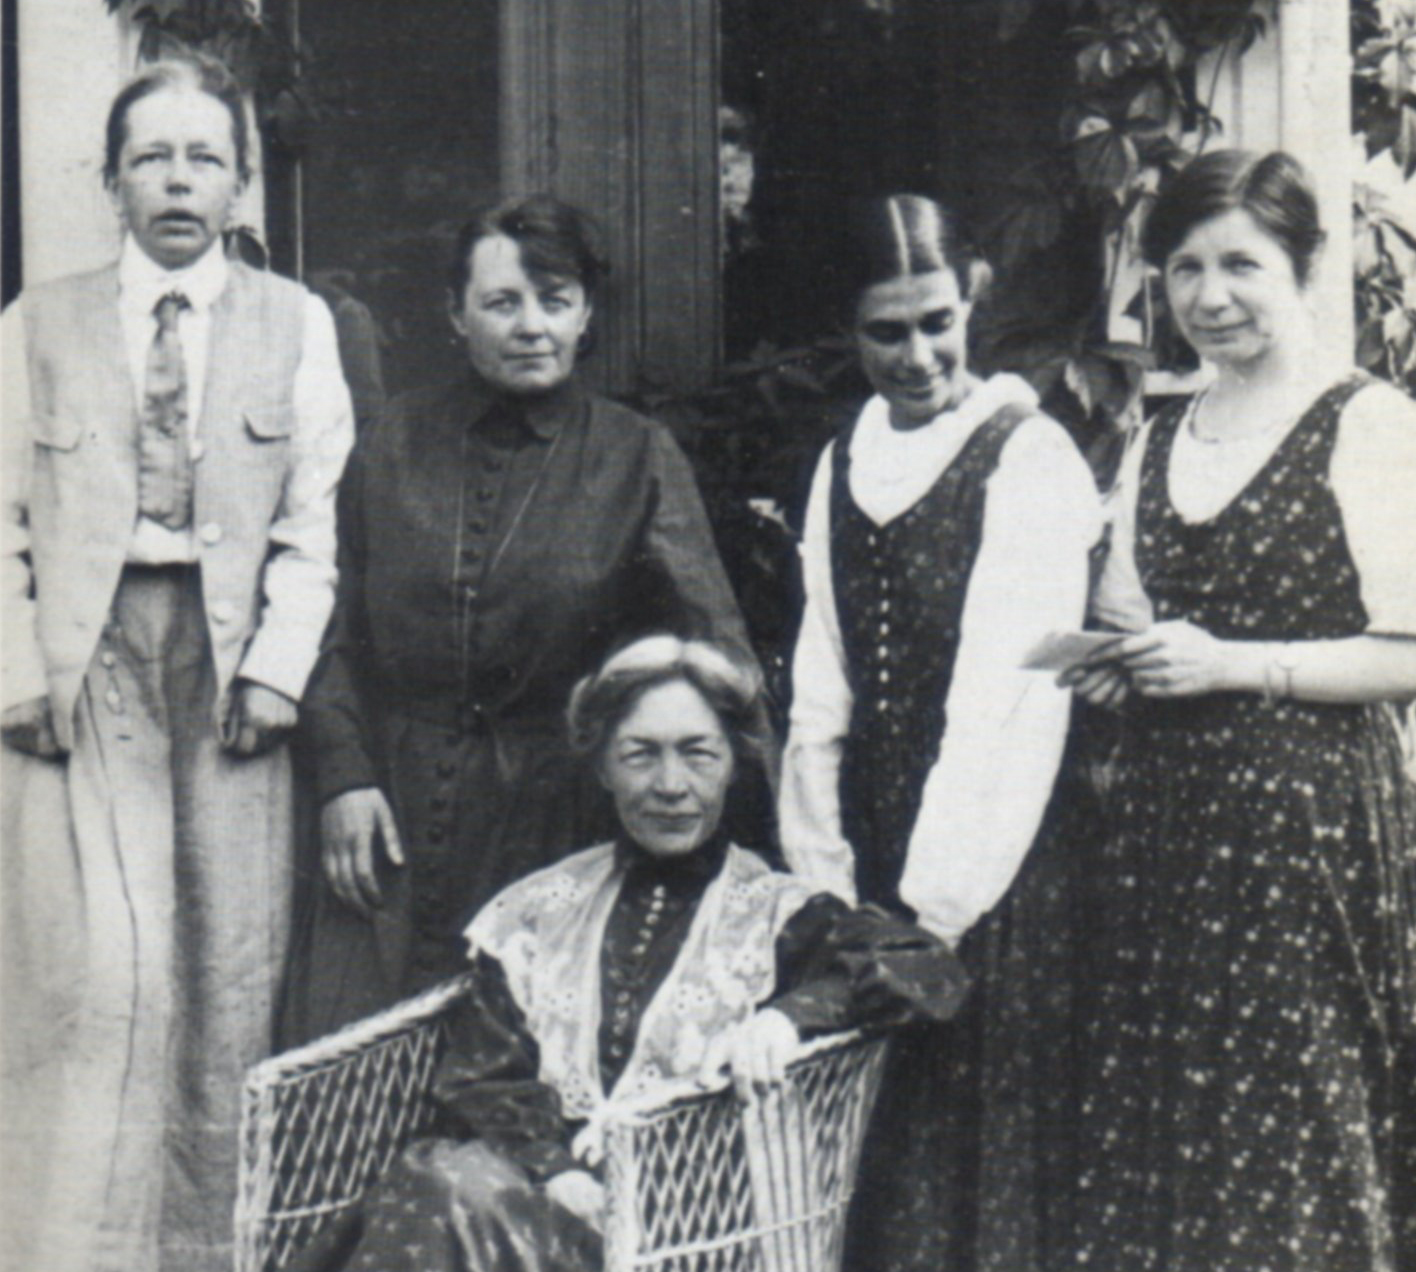 Black and white picture of the Swedish feminist group from 1920s.